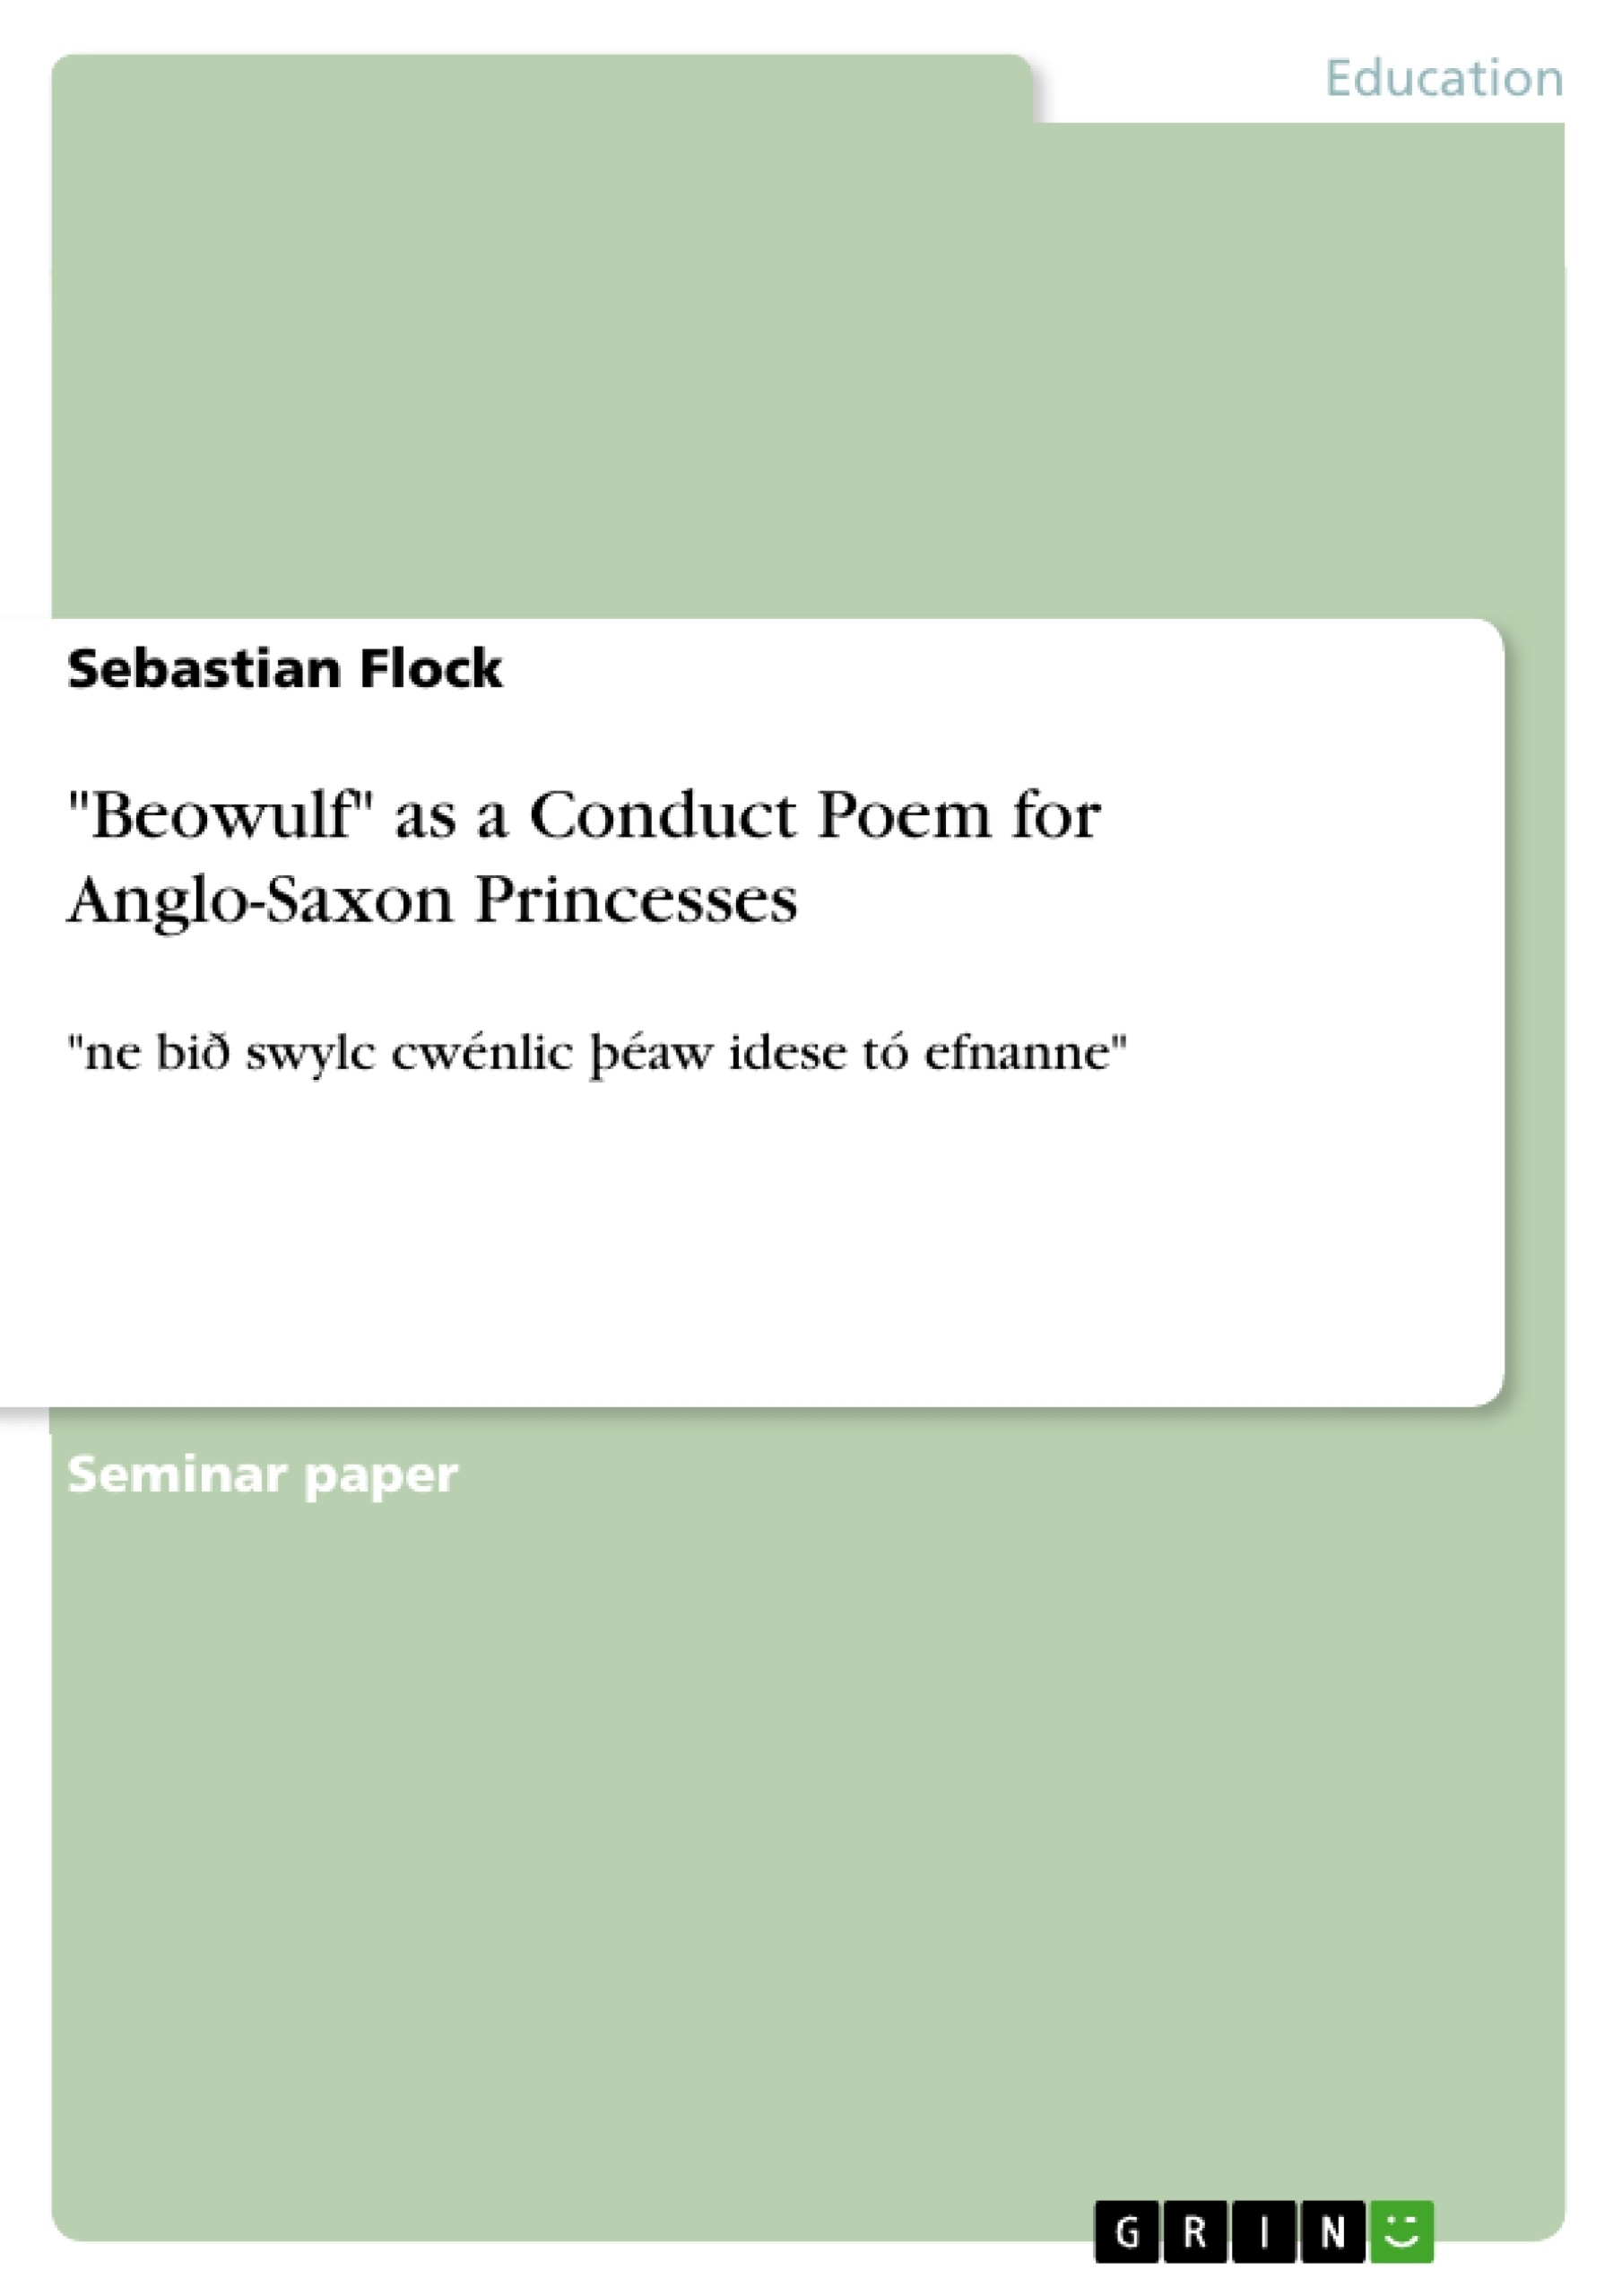 Title: "Beowulf" as a Conduct Poem for Anglo-Saxon Princesses